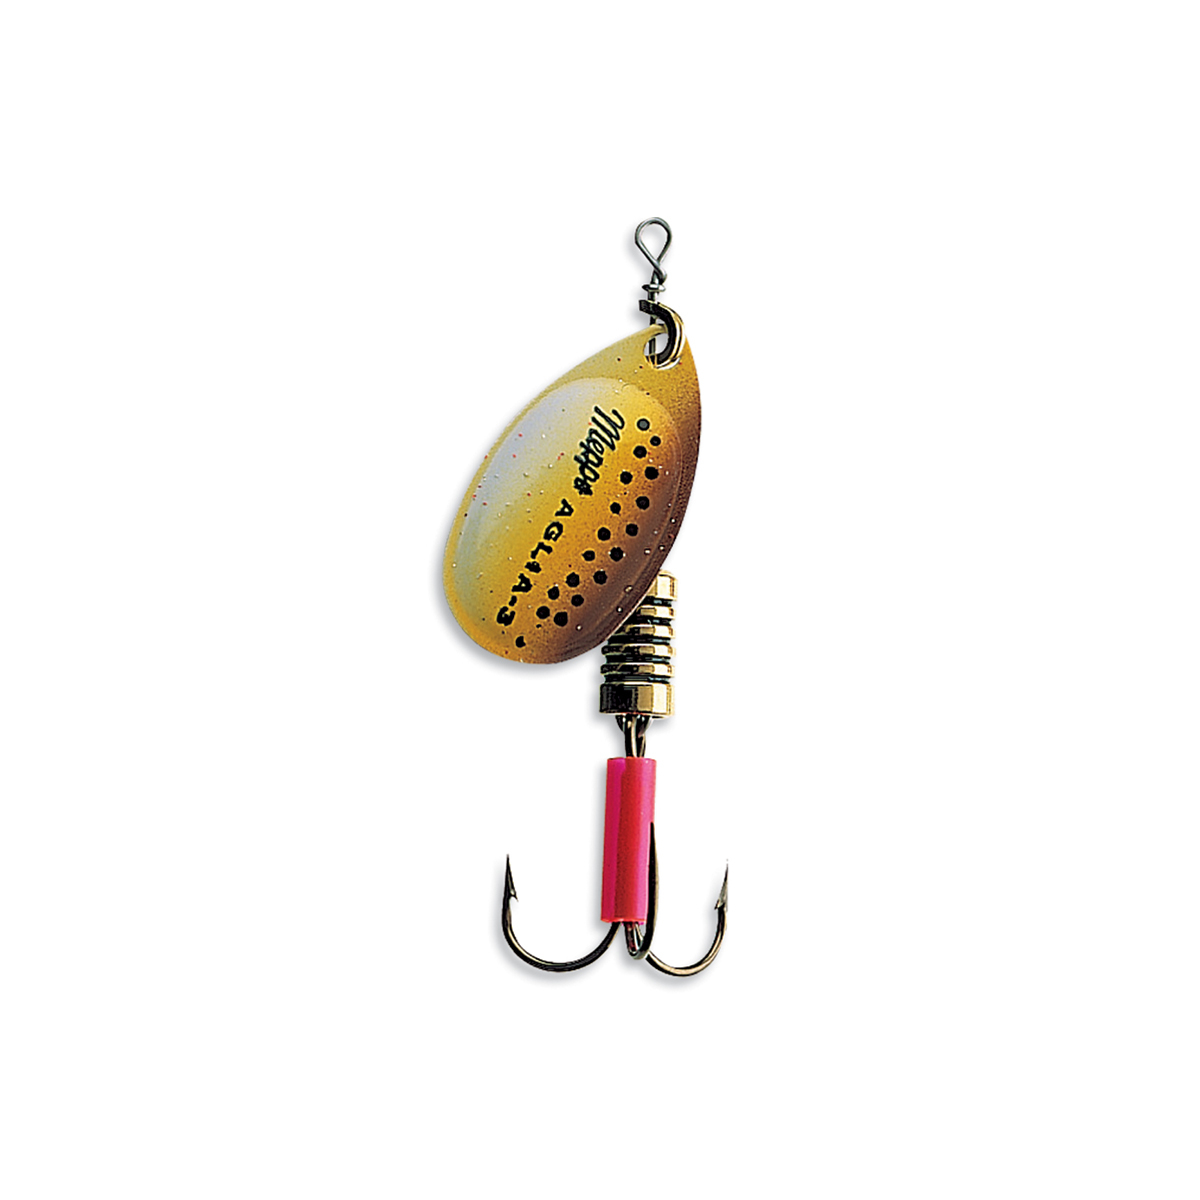 Mepps Aglia Brown Trout 5 - Boddenangler-Fishing Tackle Online Store, 6,10 €